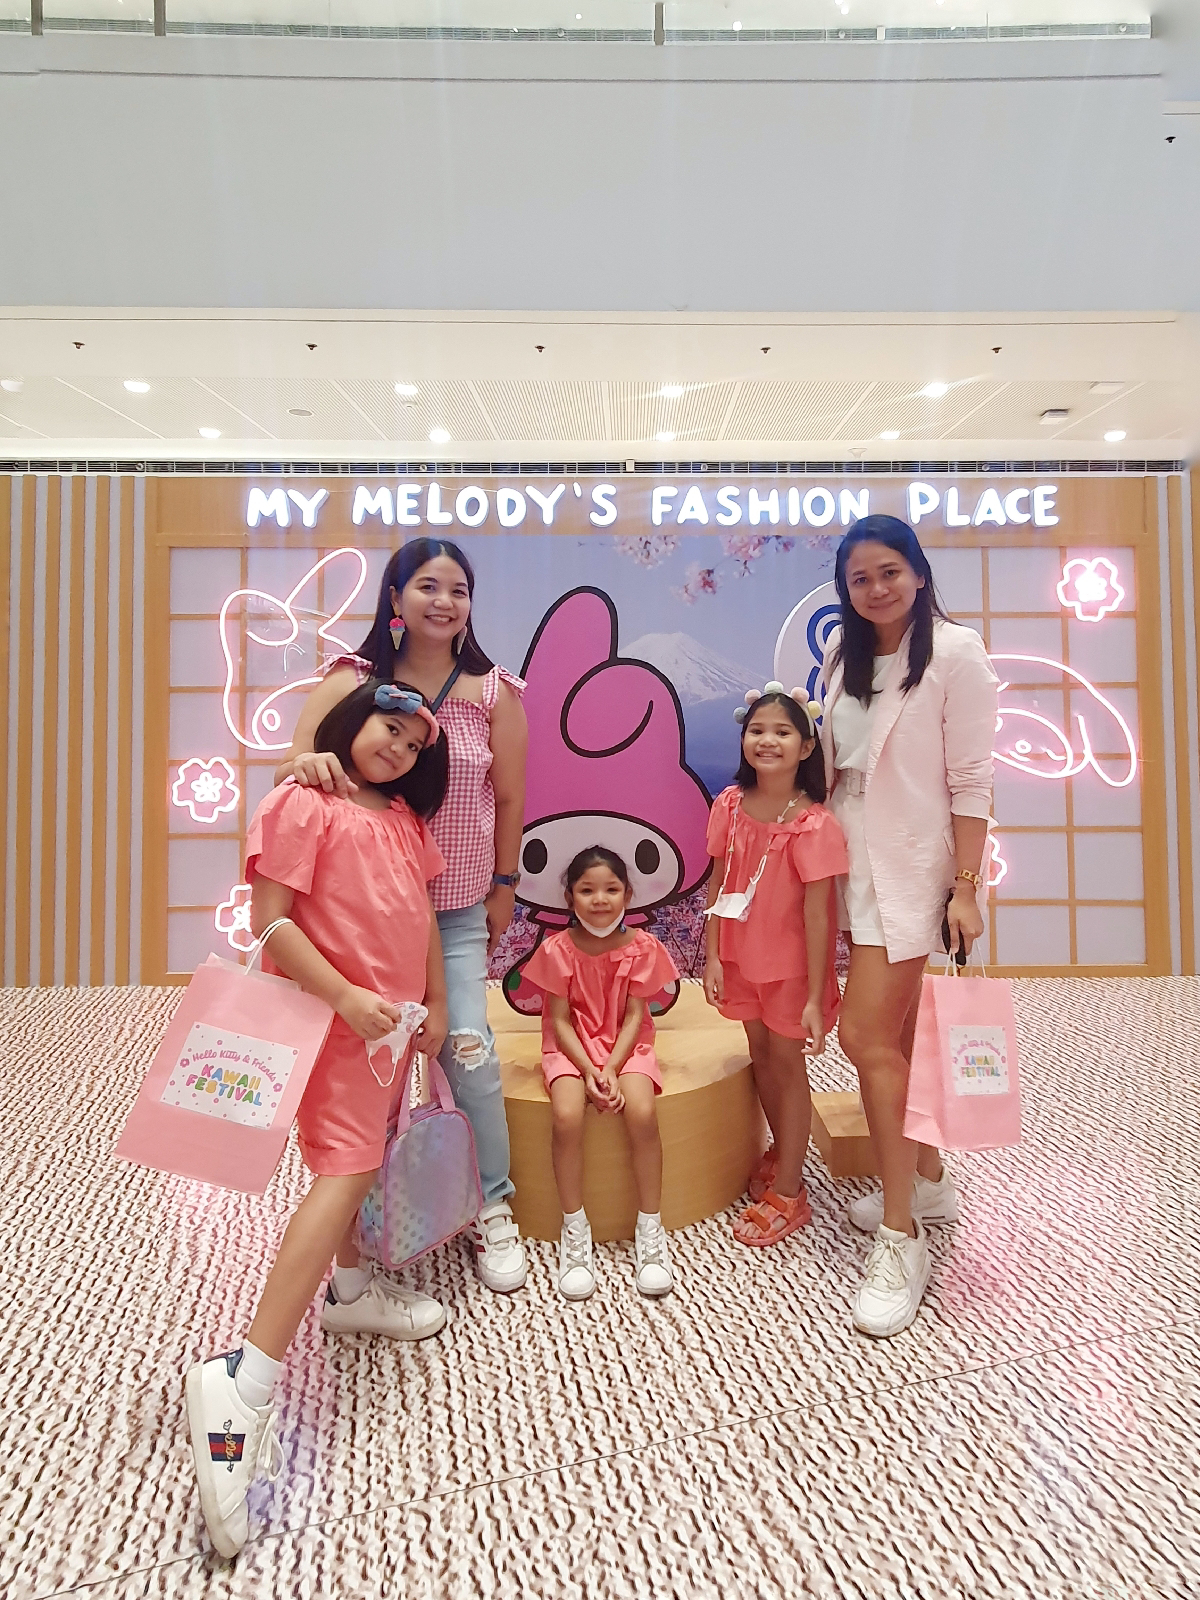 SM MEGAMALL: IT’S A KAWAII FESTIVAL WITH HELLO KITTY AND FRIENDS!